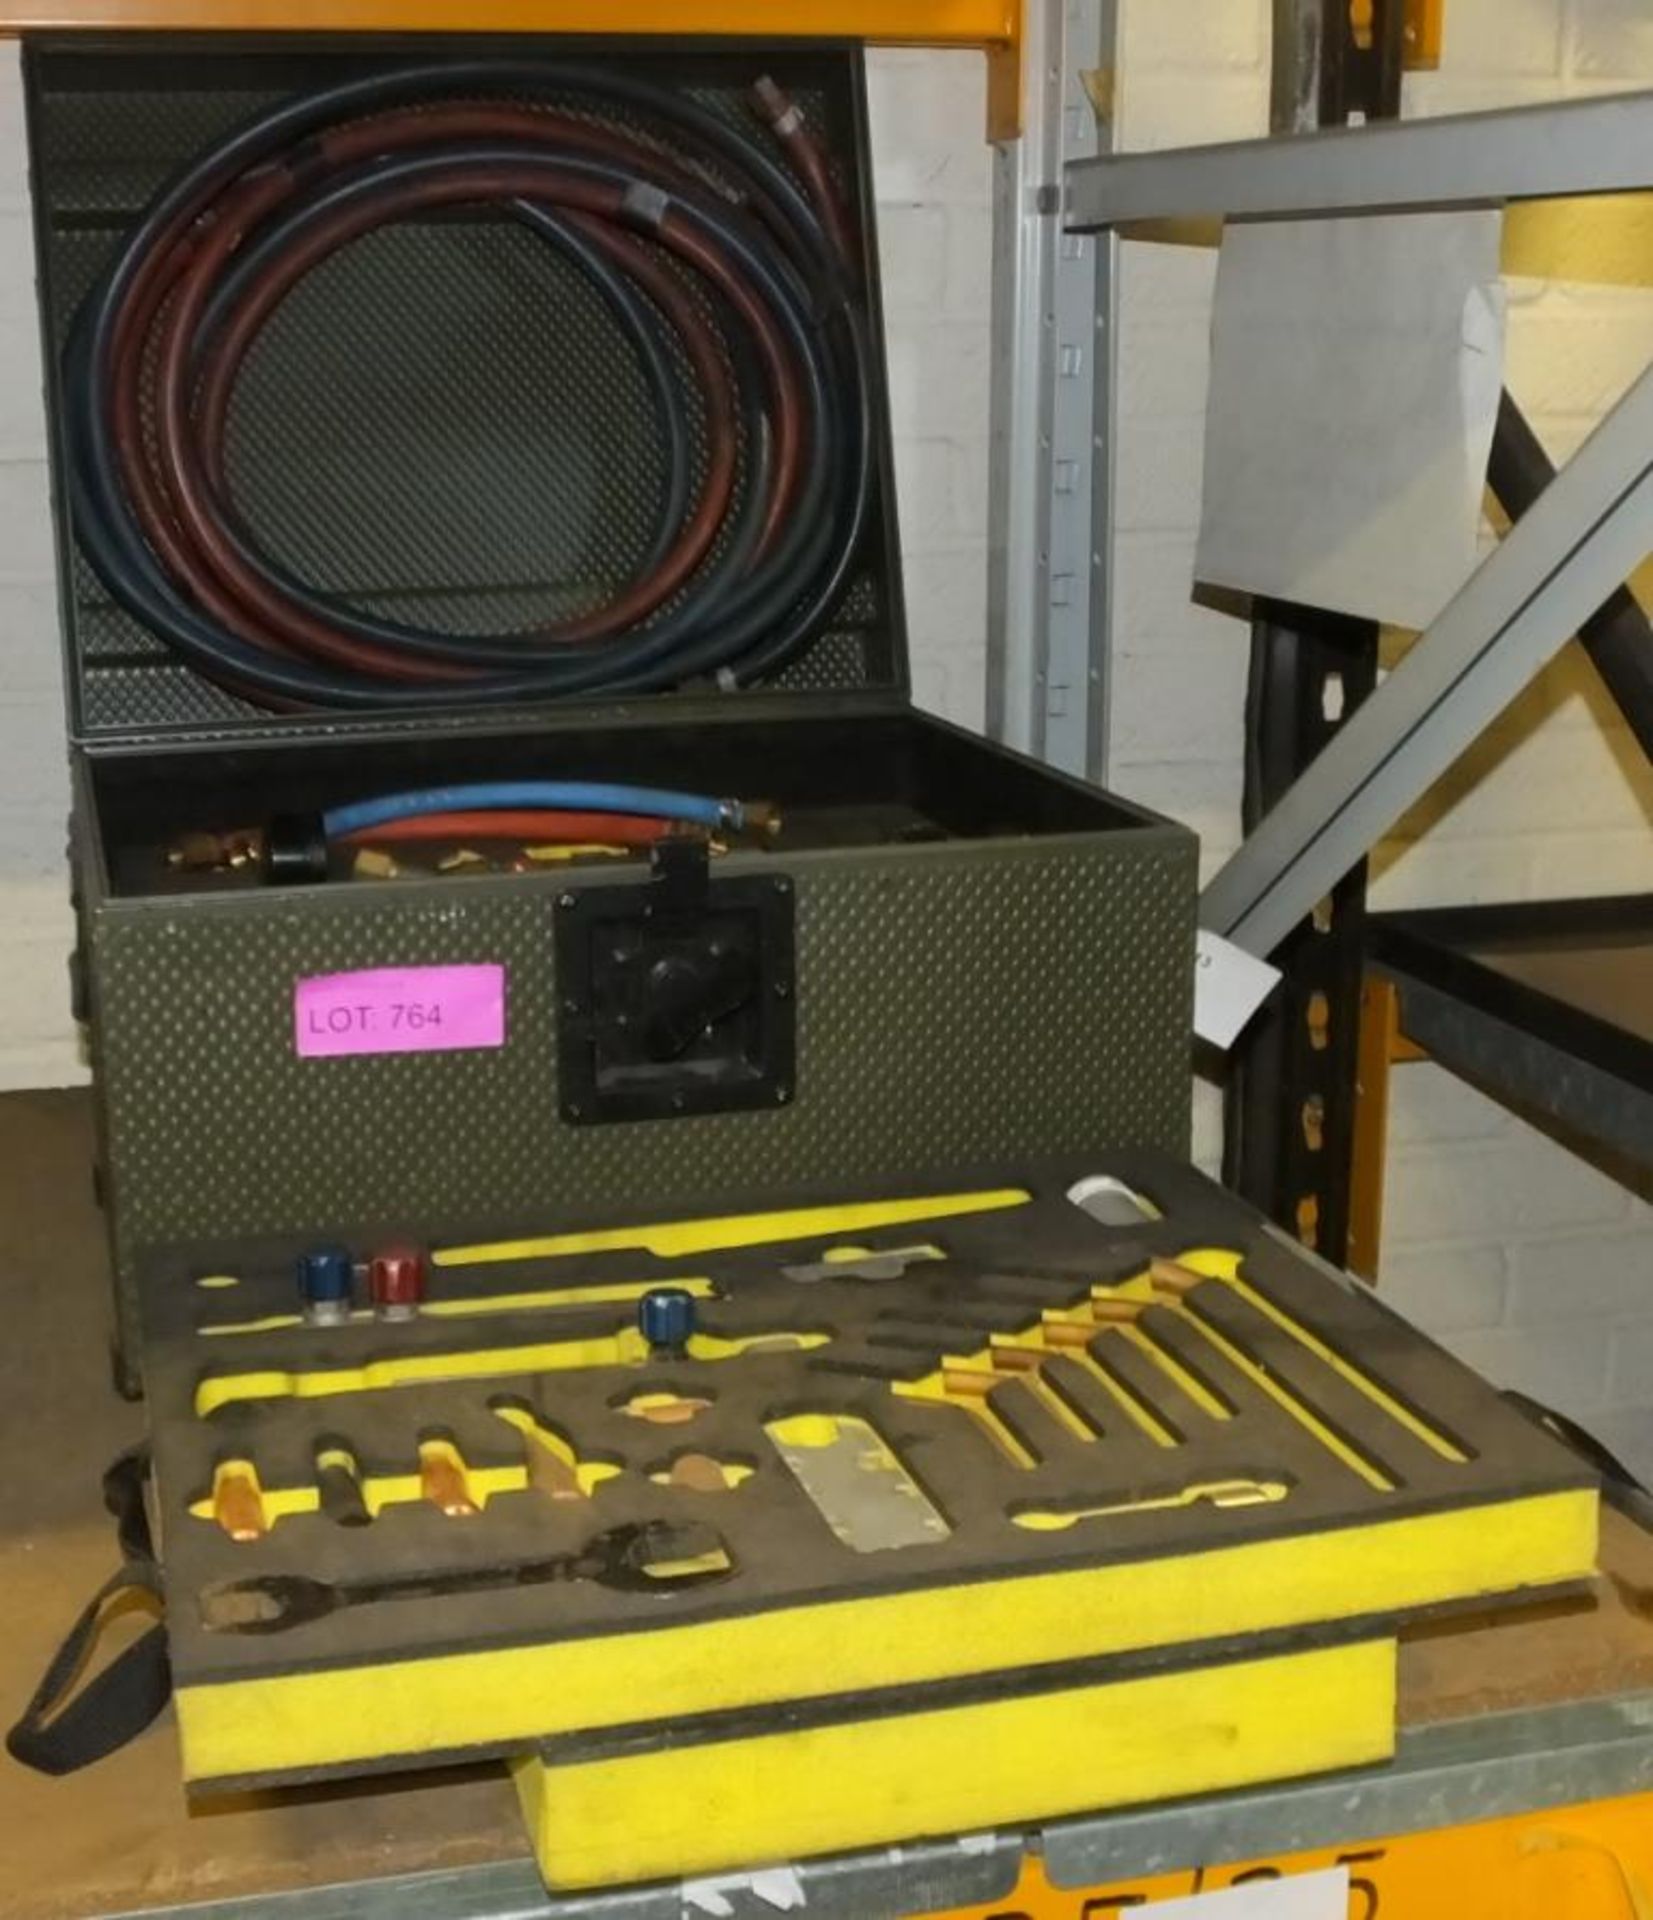 Gas Welder Cutting Set - Various Nozzles, Hoses in carry case